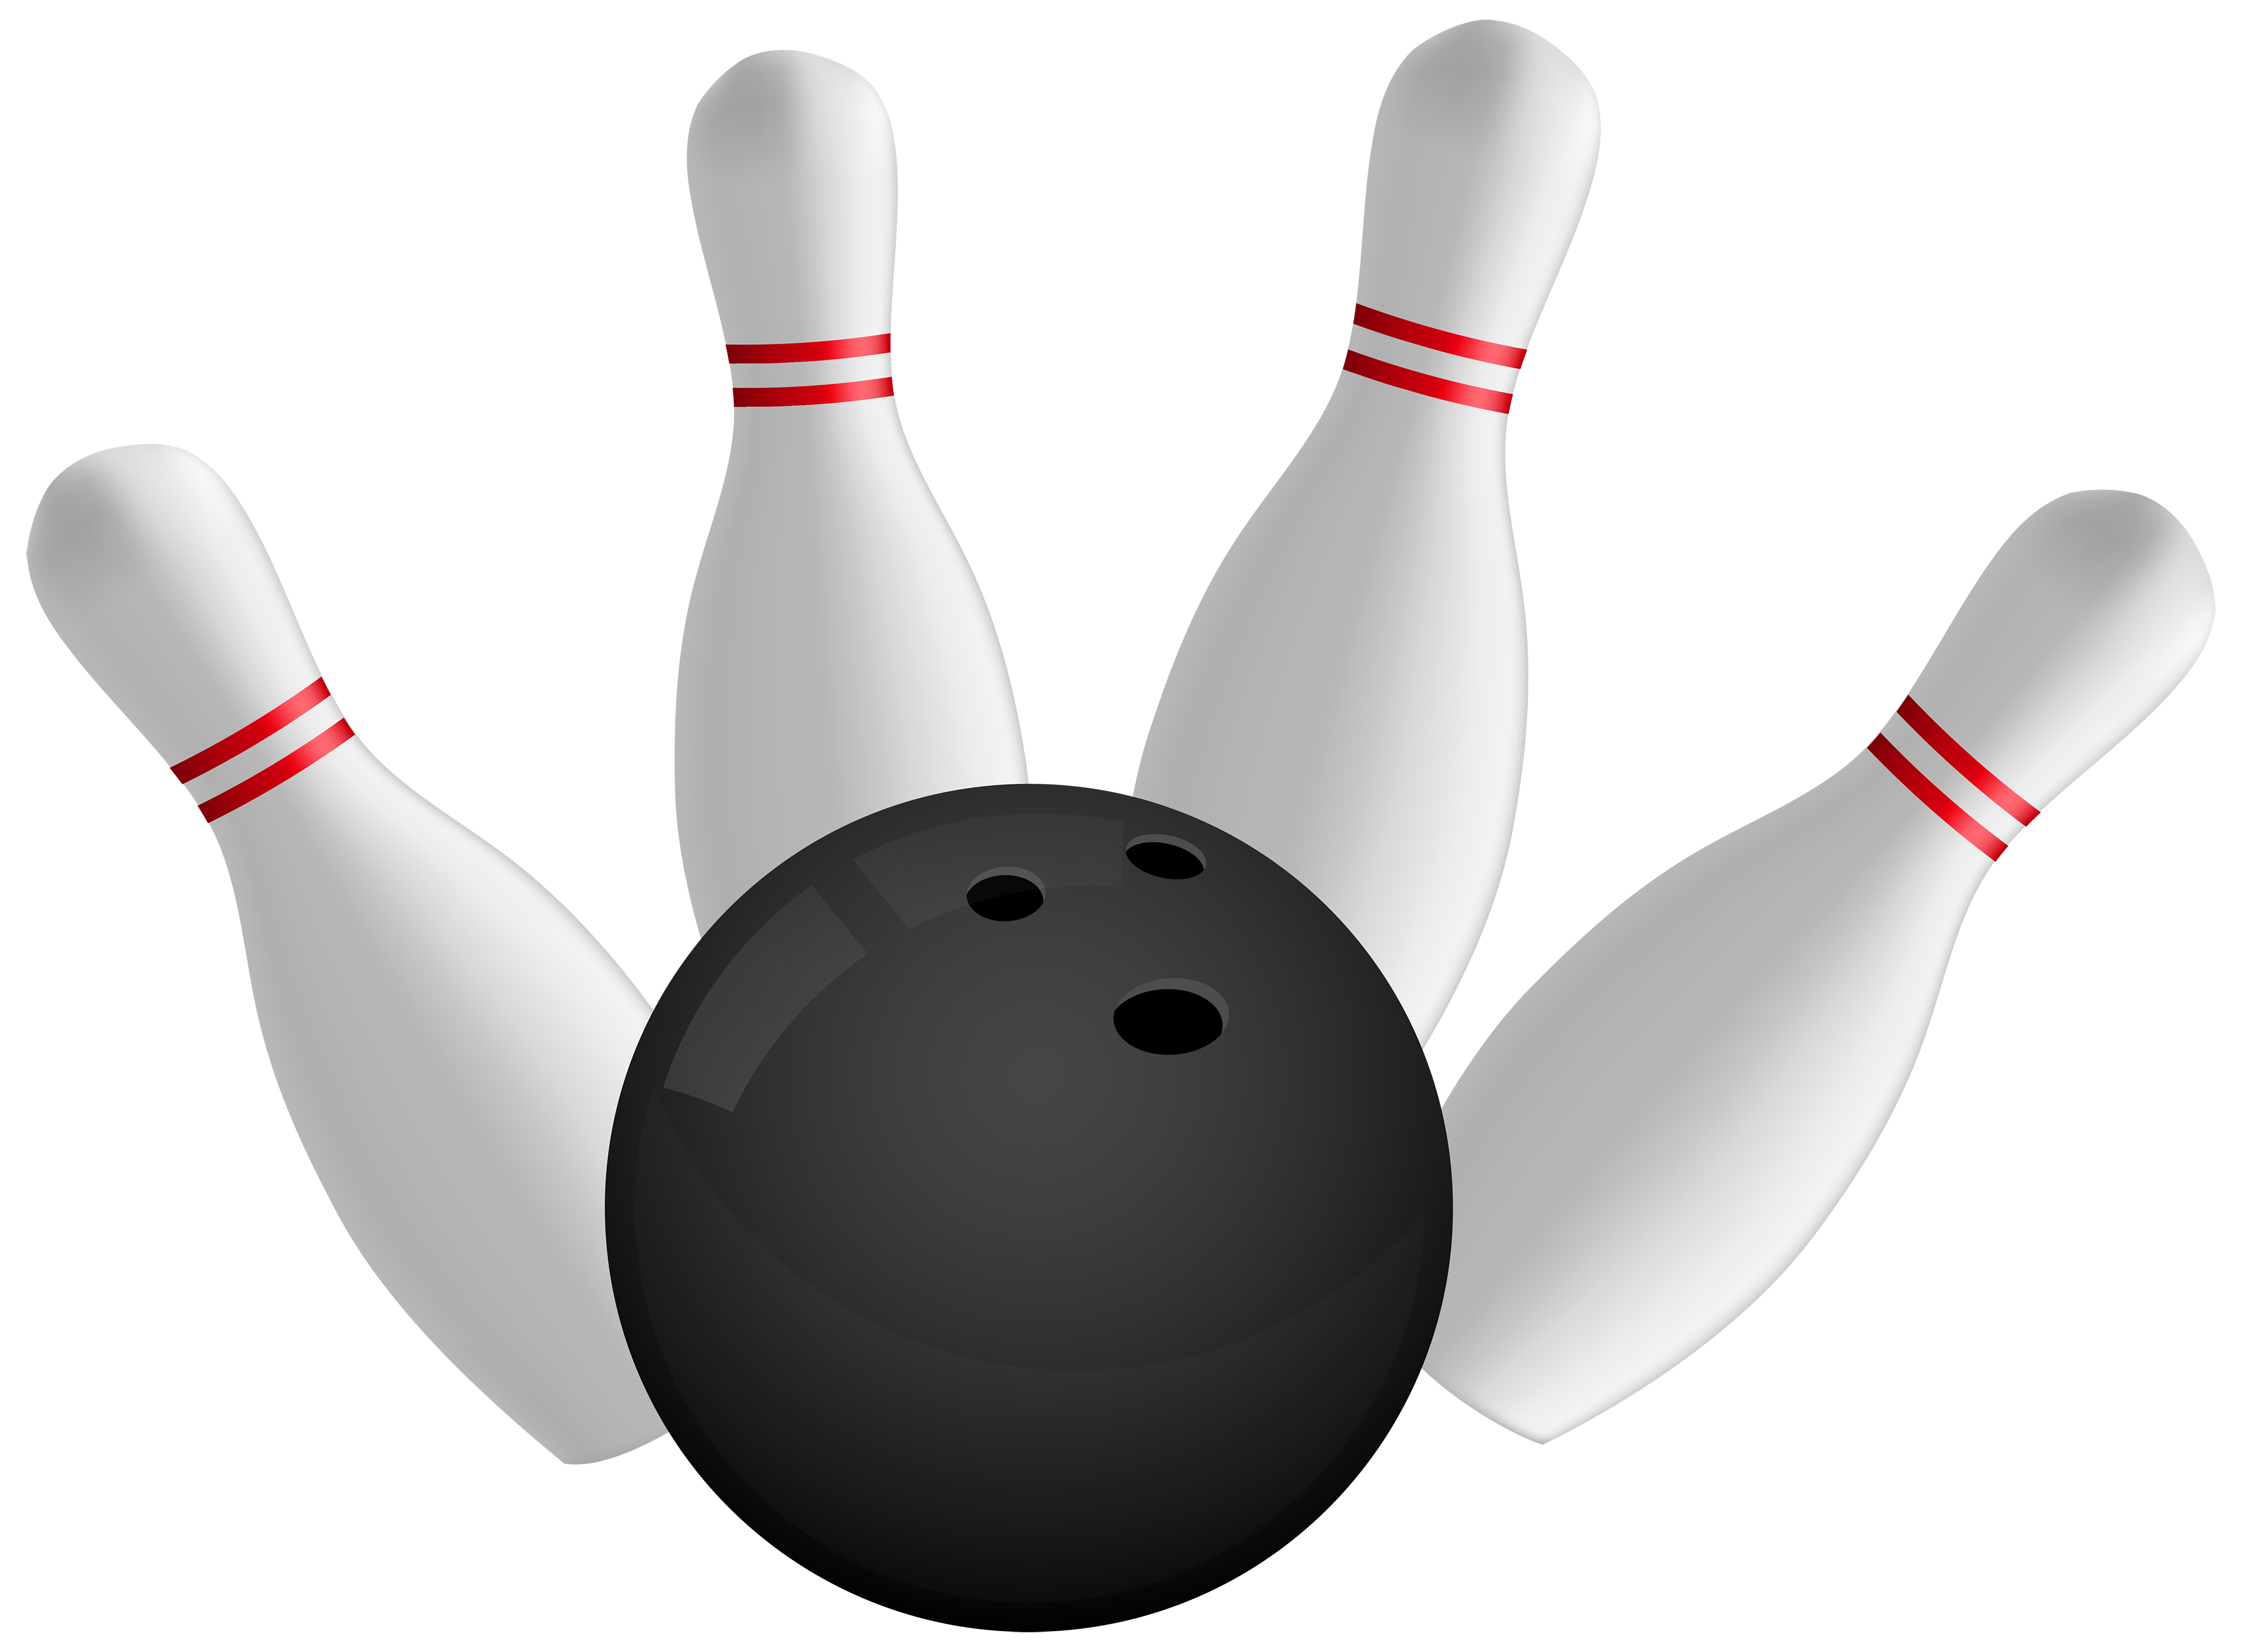 bowling clipart pictures of dogs